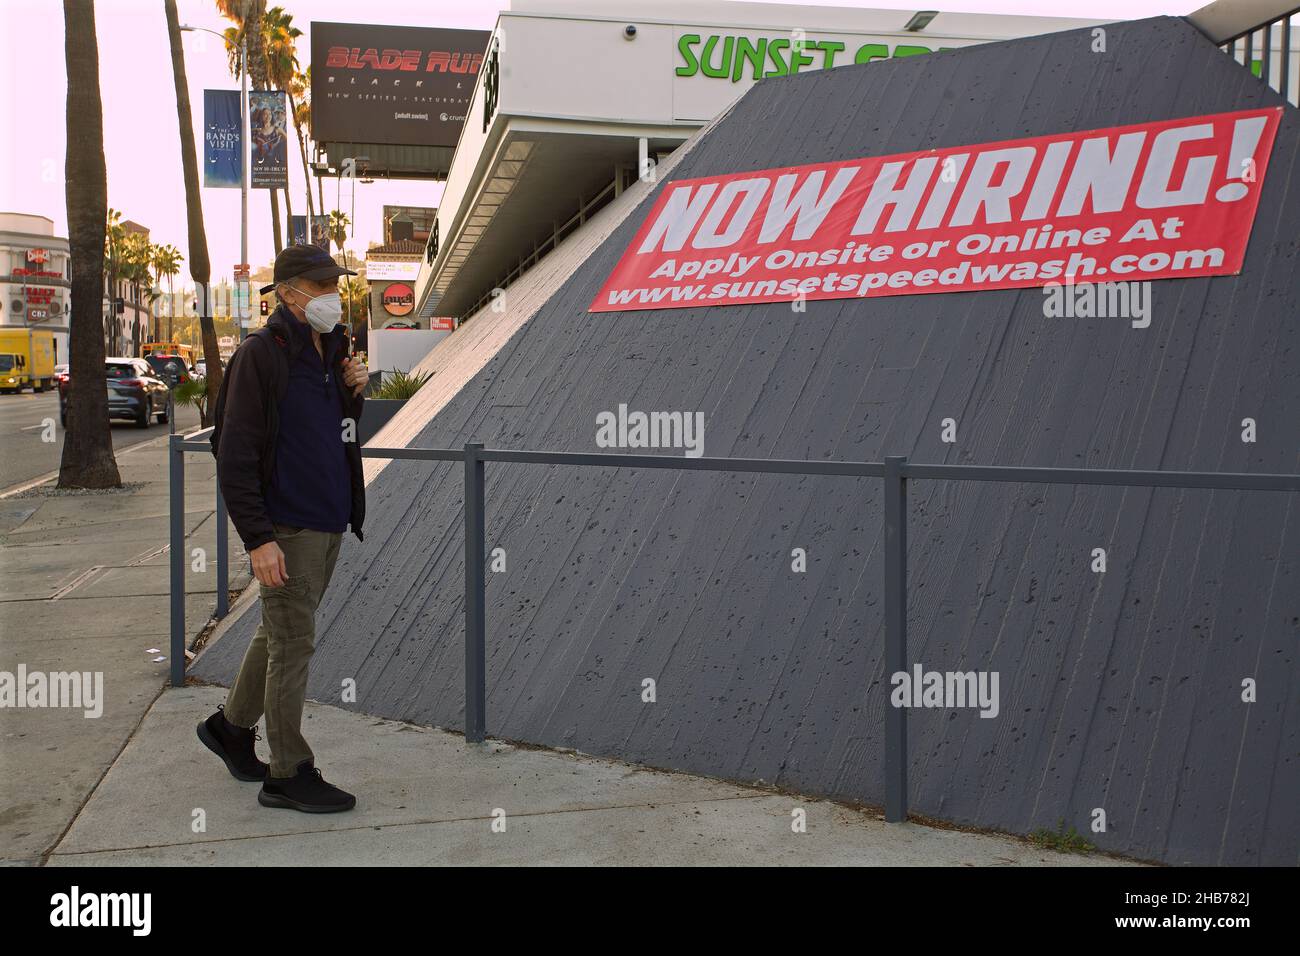 LOS ANGELES, STATI UNITI D'AMERICA - 10 dicembre 2021: Man Passing a Now Hiring banner on Sunset Boulevard in West Hollywood Foto Stock